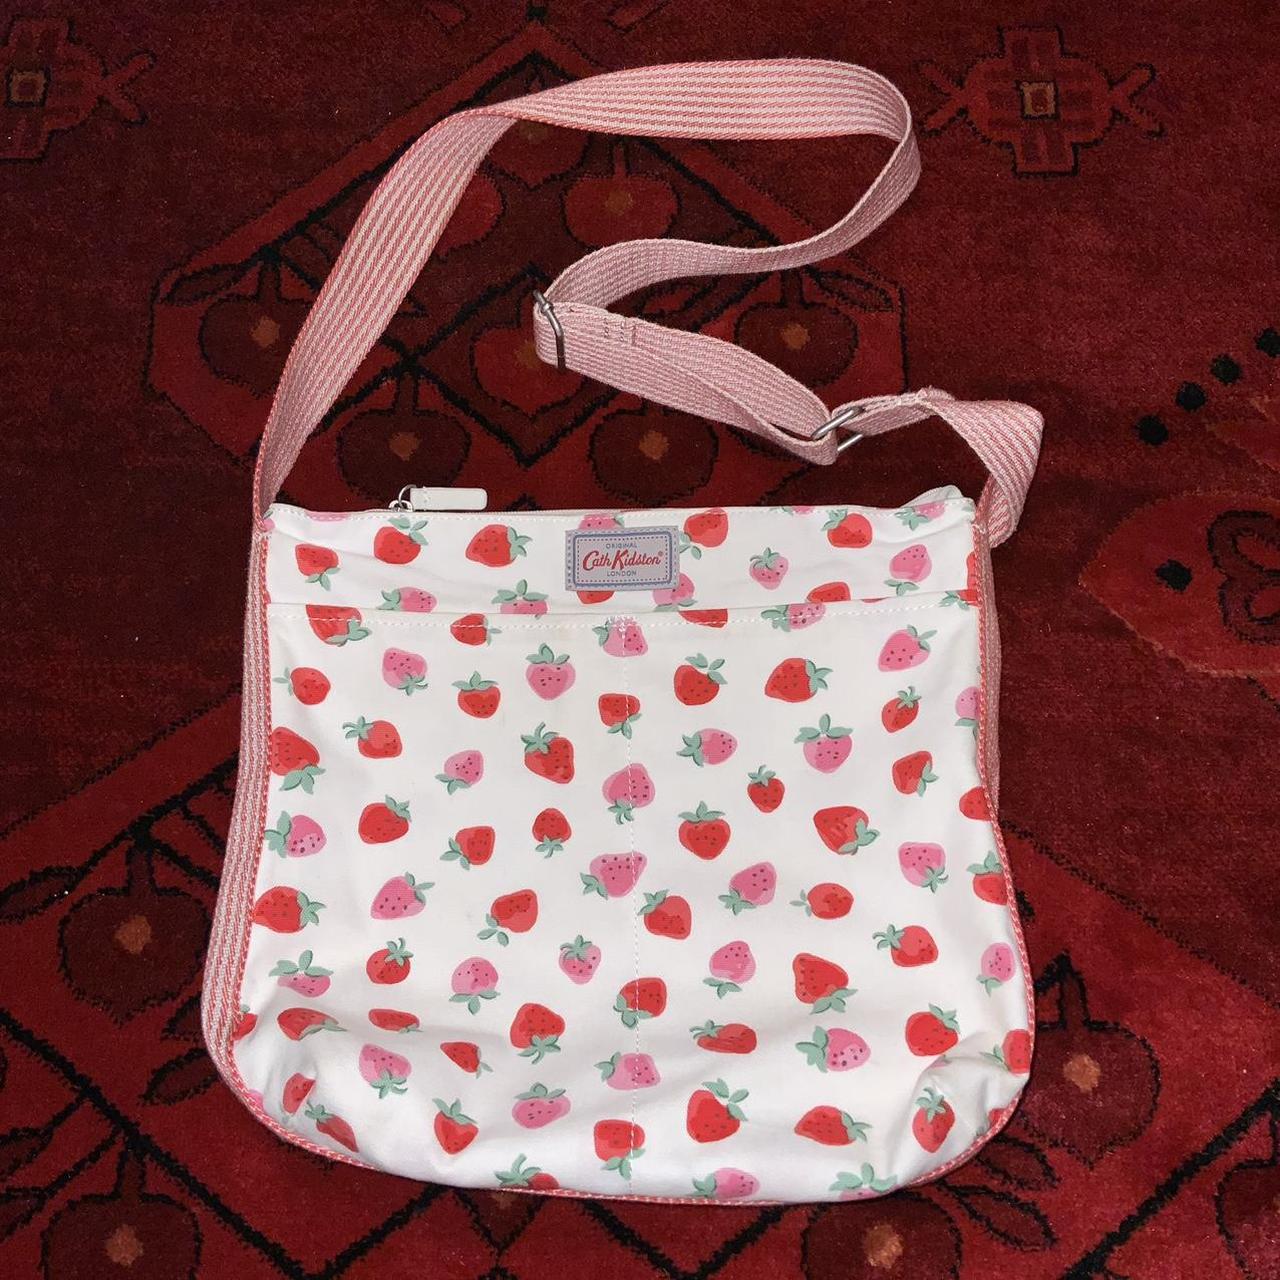 Cath Kidston Women's White and Pink Bag